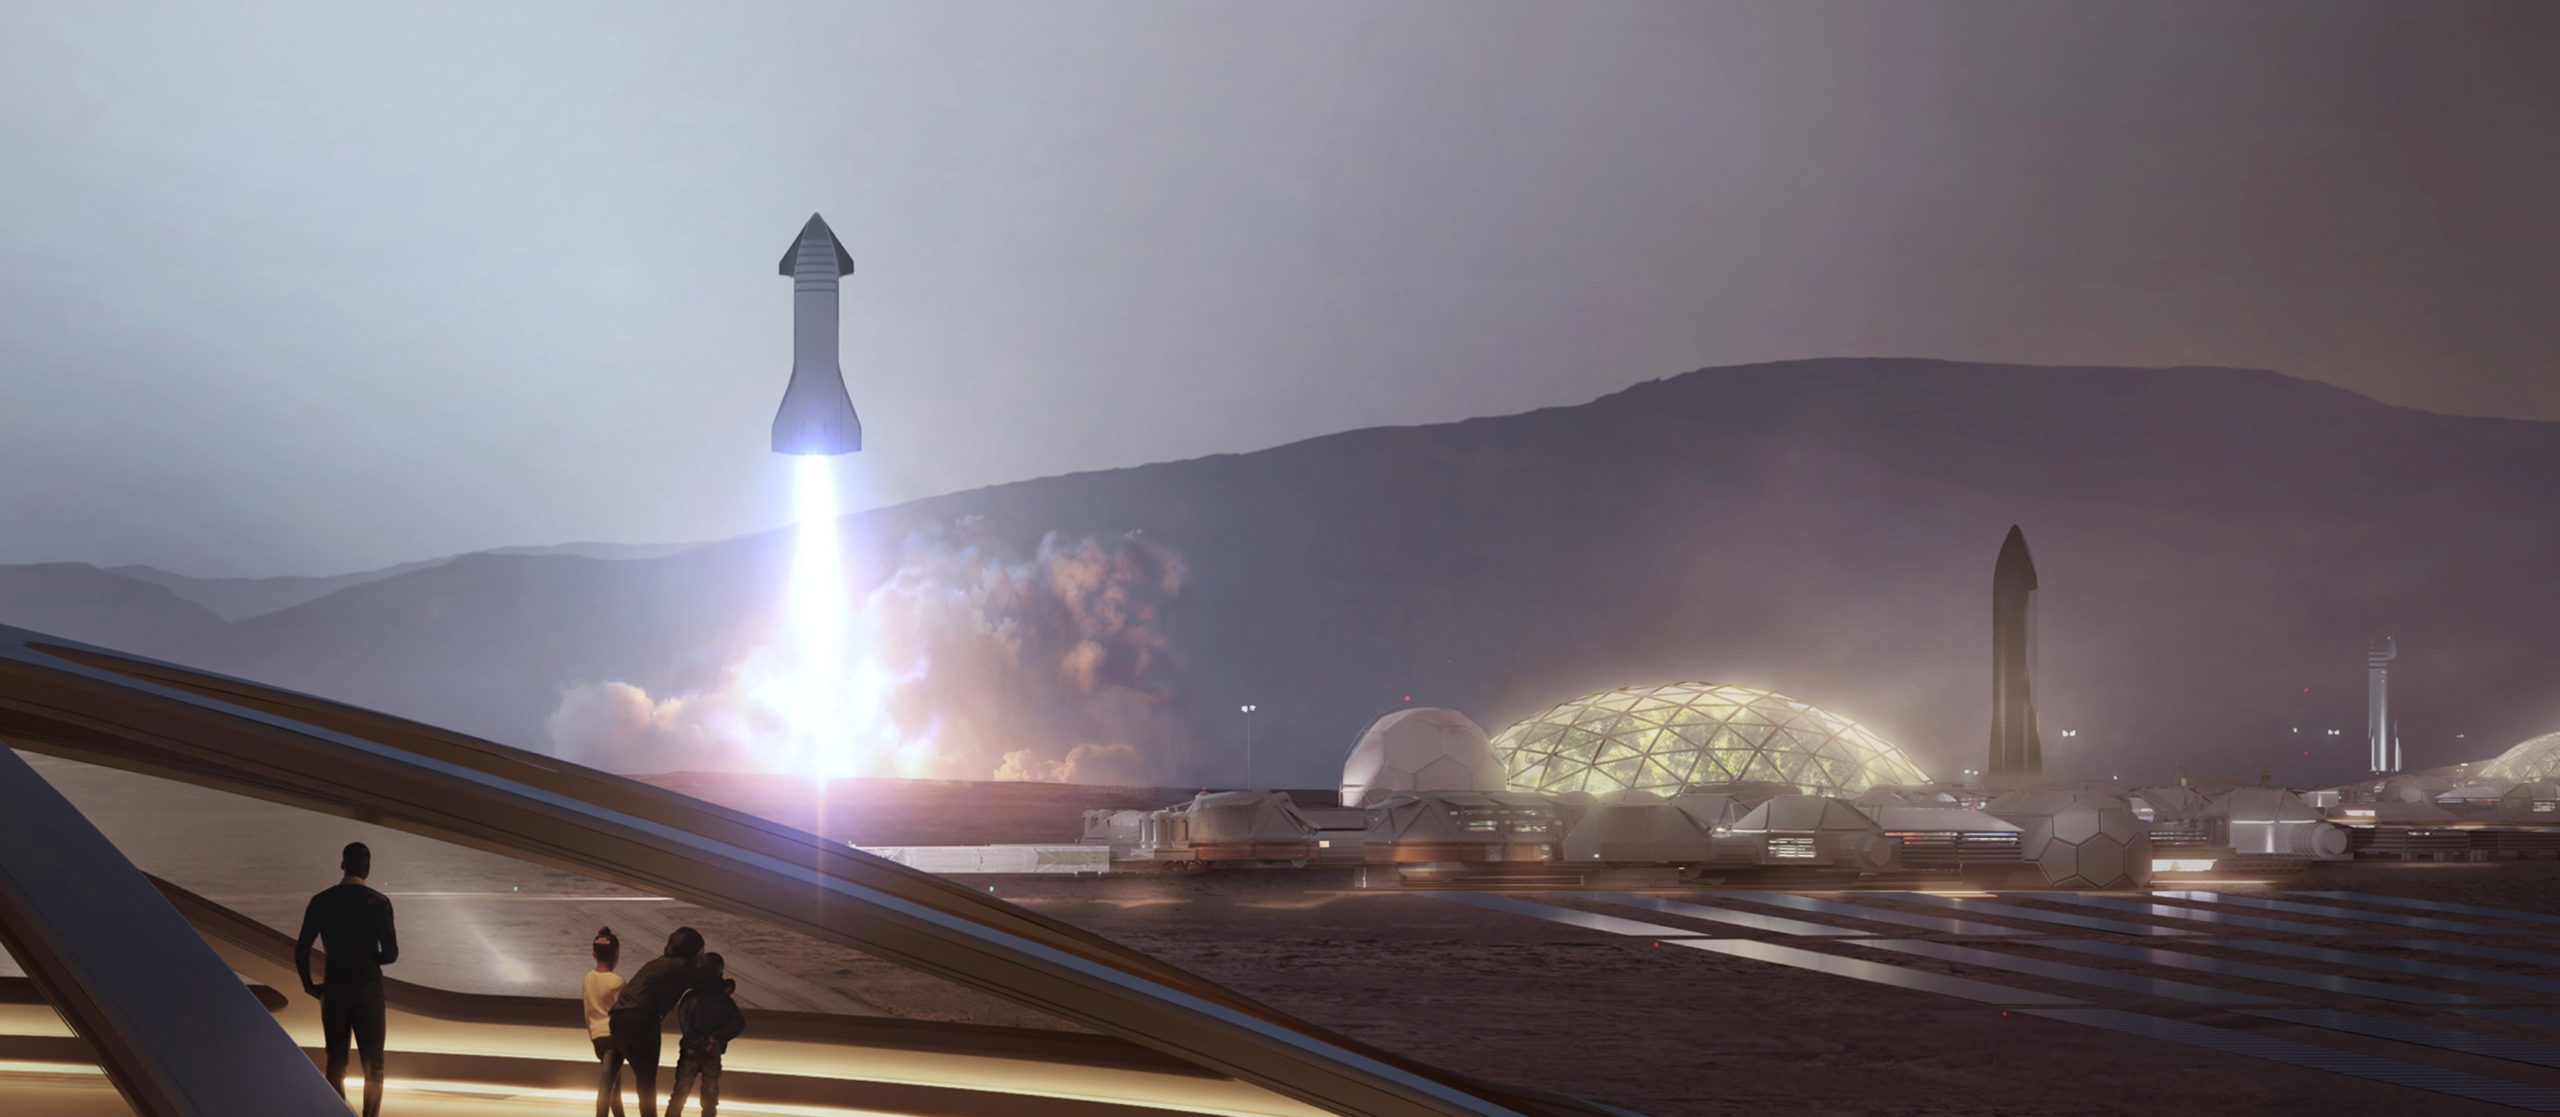 SpaceXs vision for future Martian city